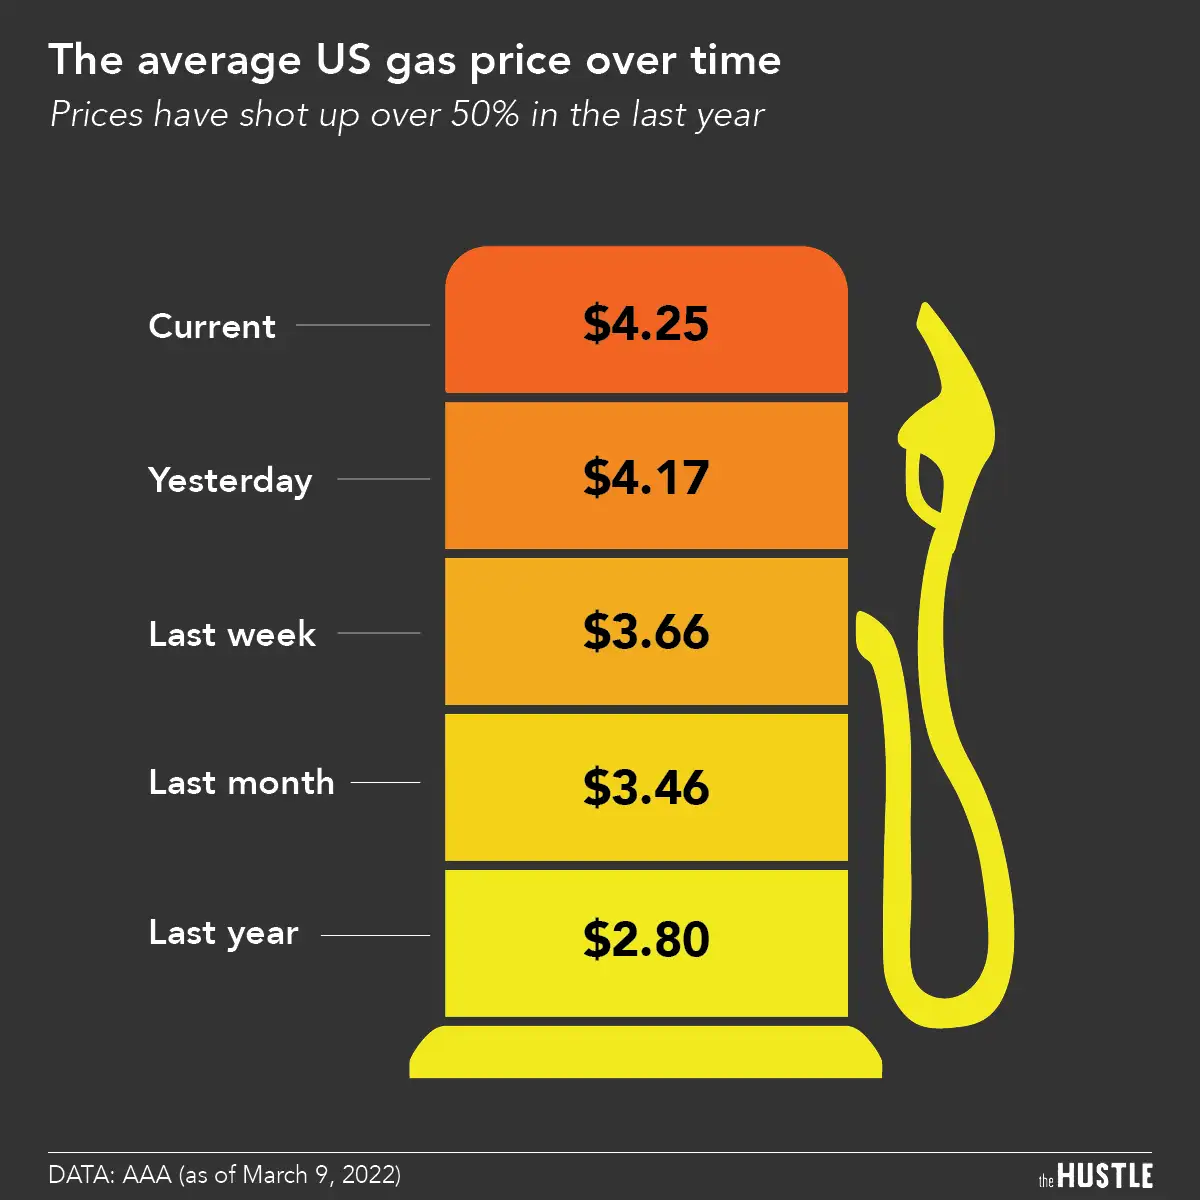 Why are gas prices skyrocketing?